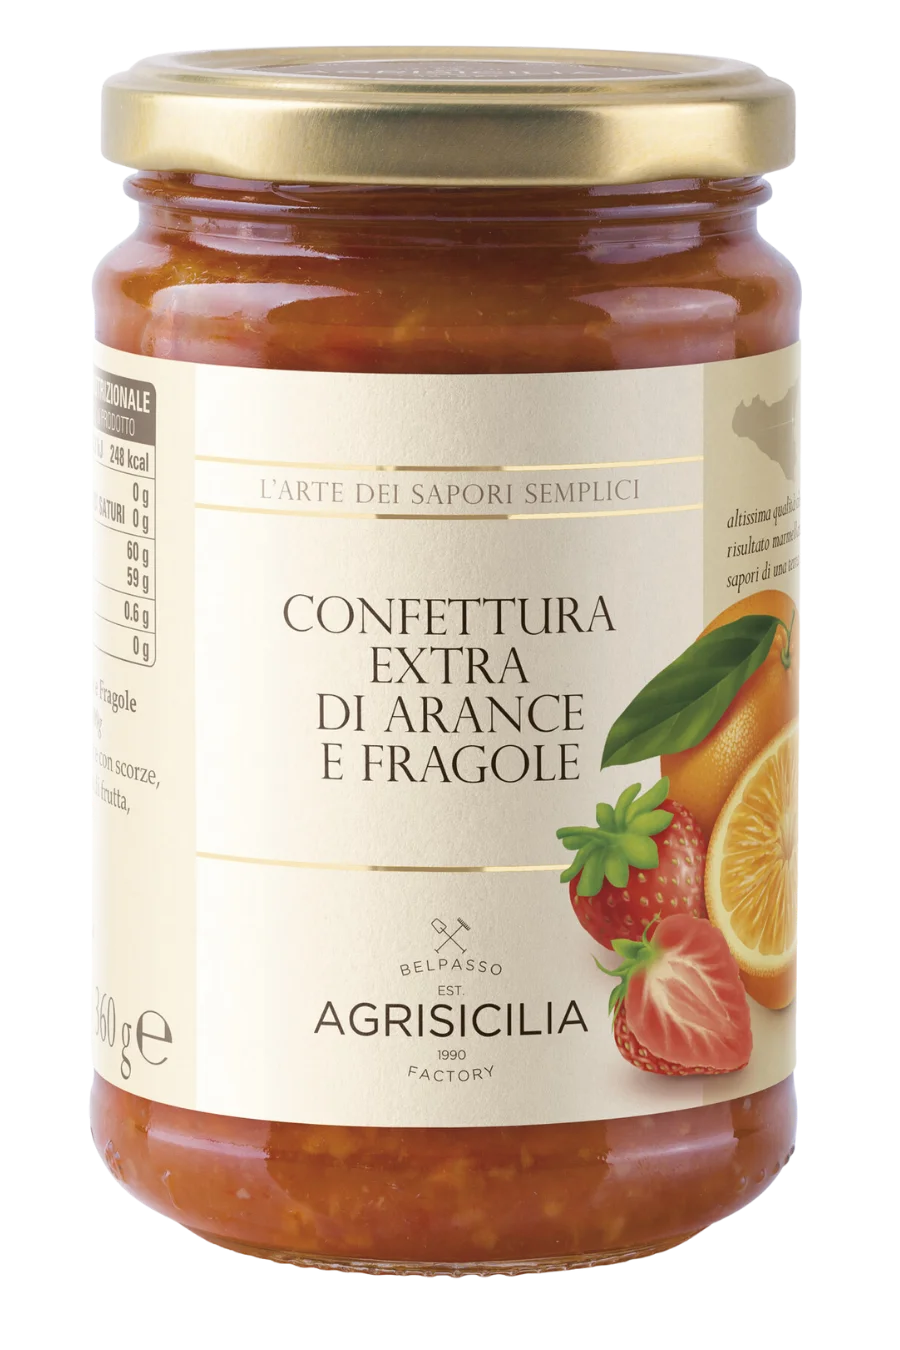 Agrisicilia extra orange and strawberry jam, with an excellent and balanced flavour between the sweet and sour of oranges